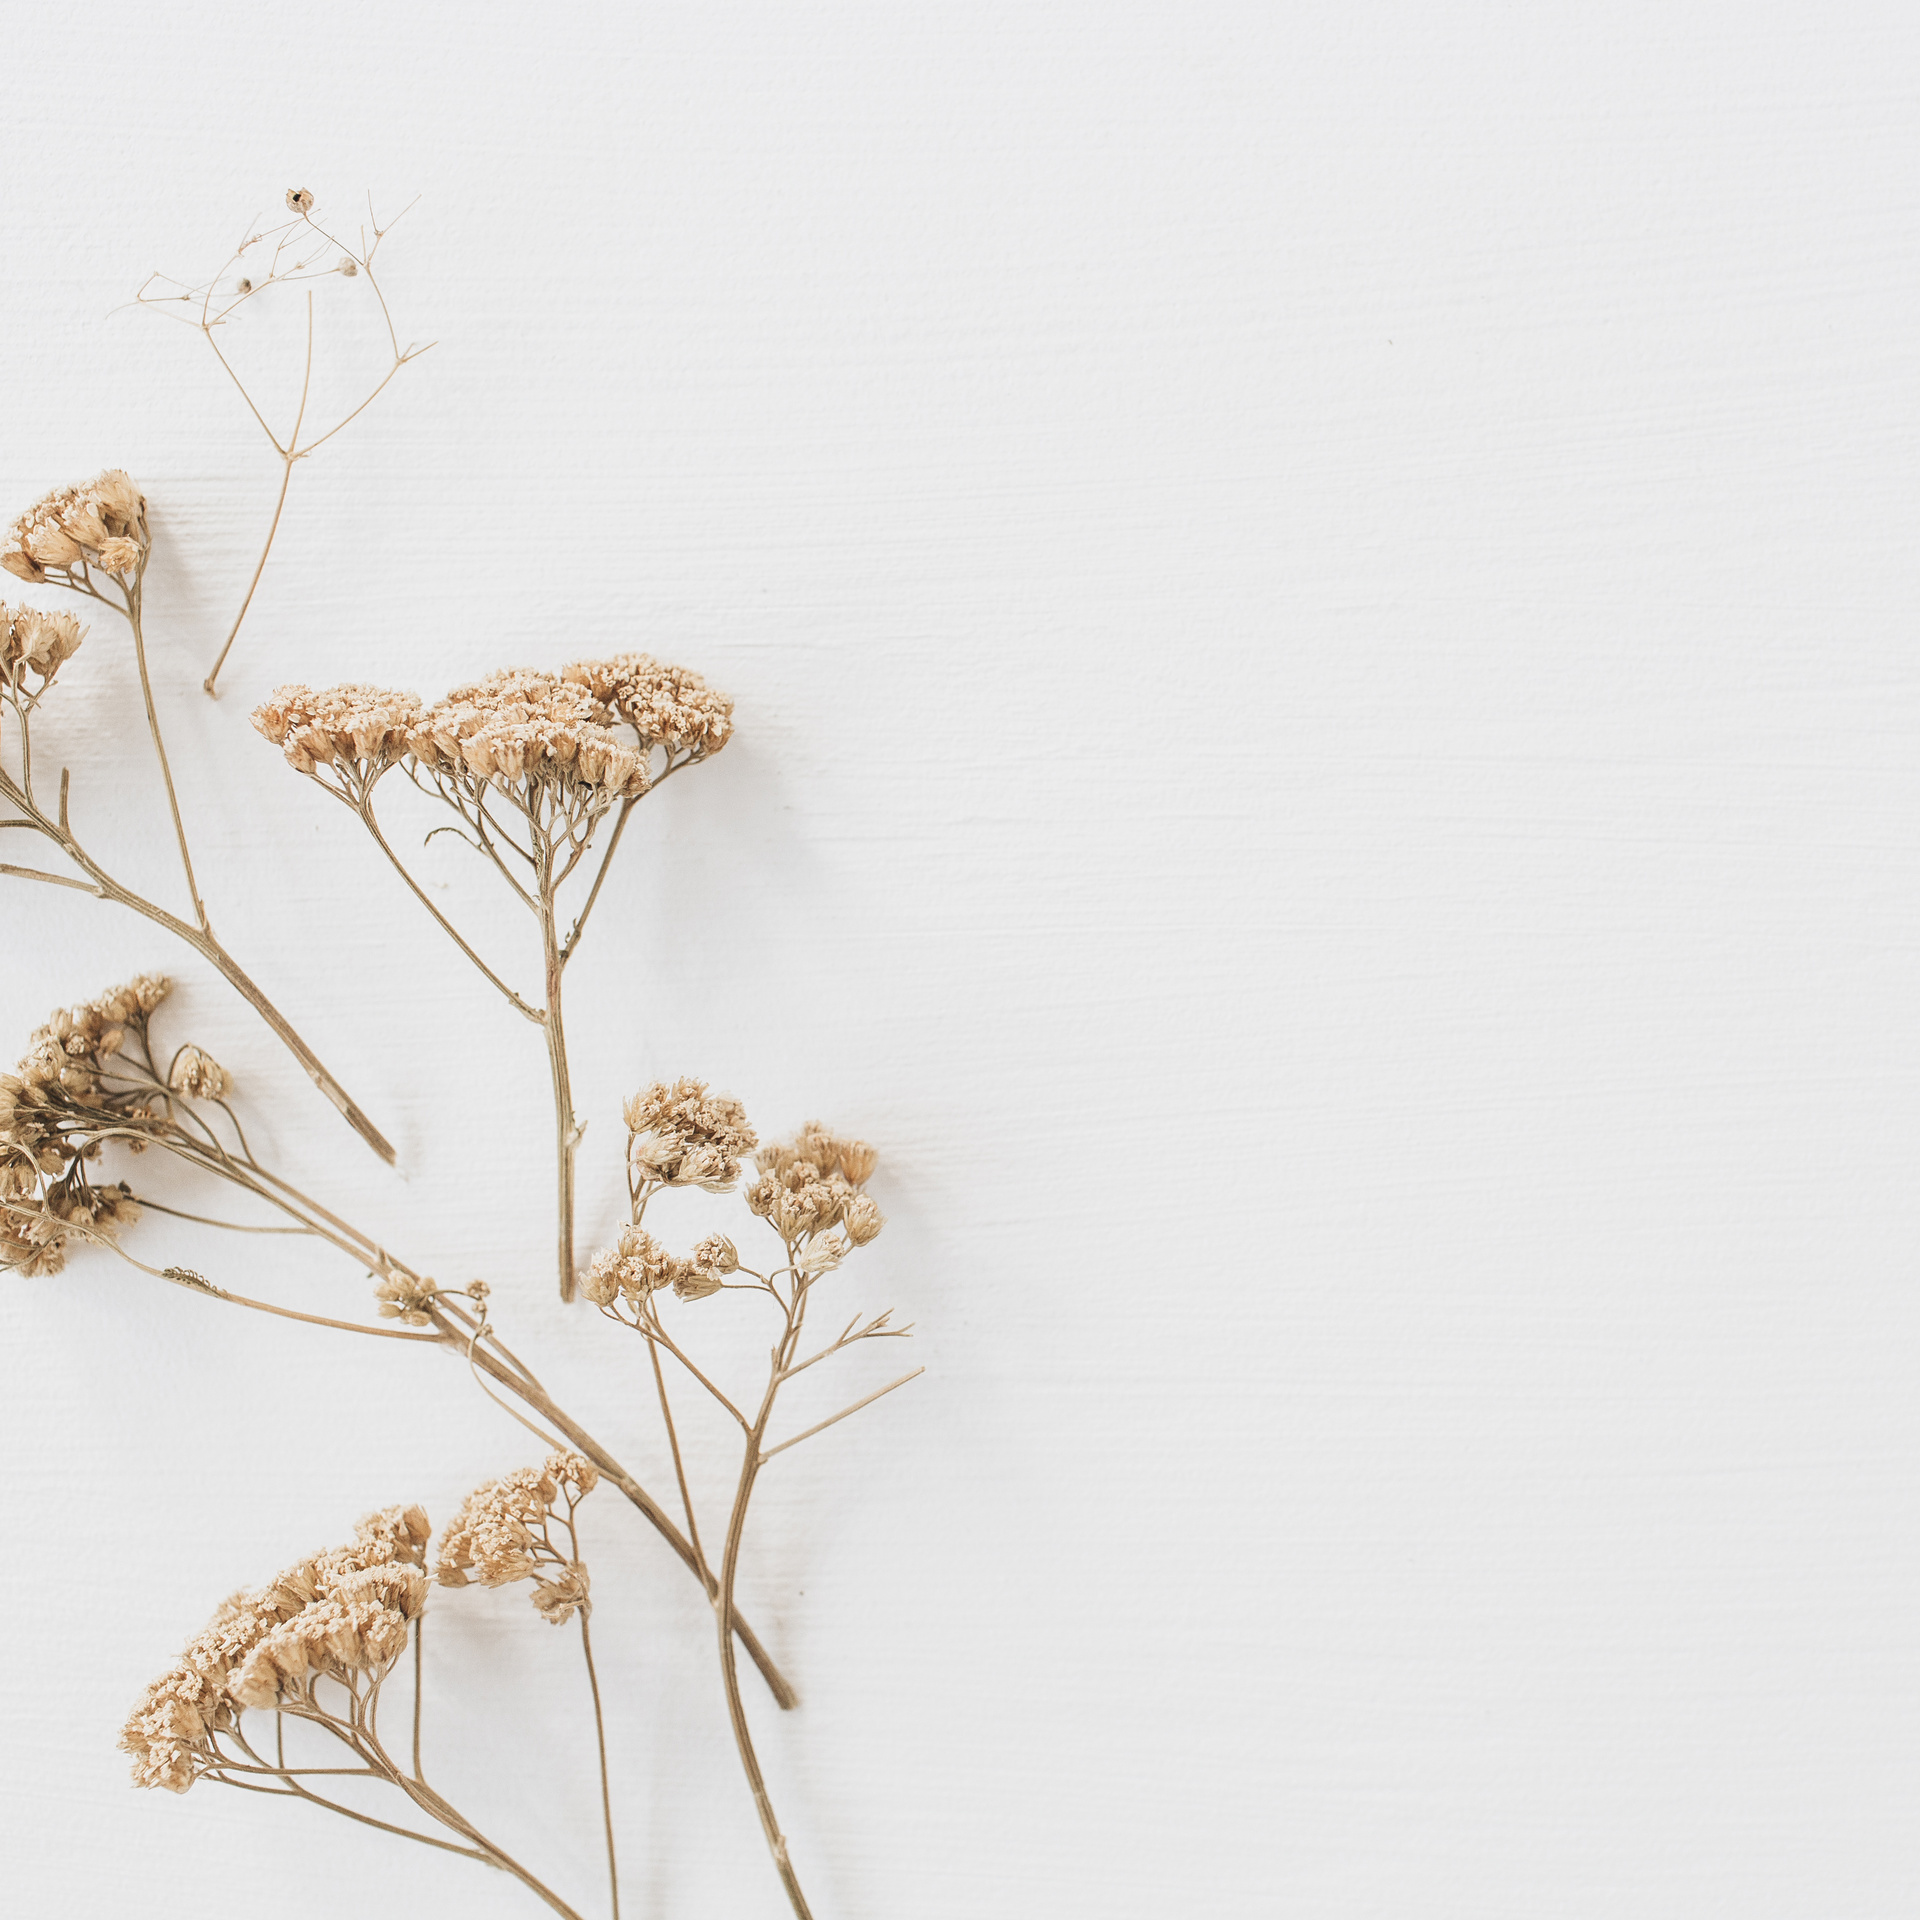 Dried Flowers on White Background